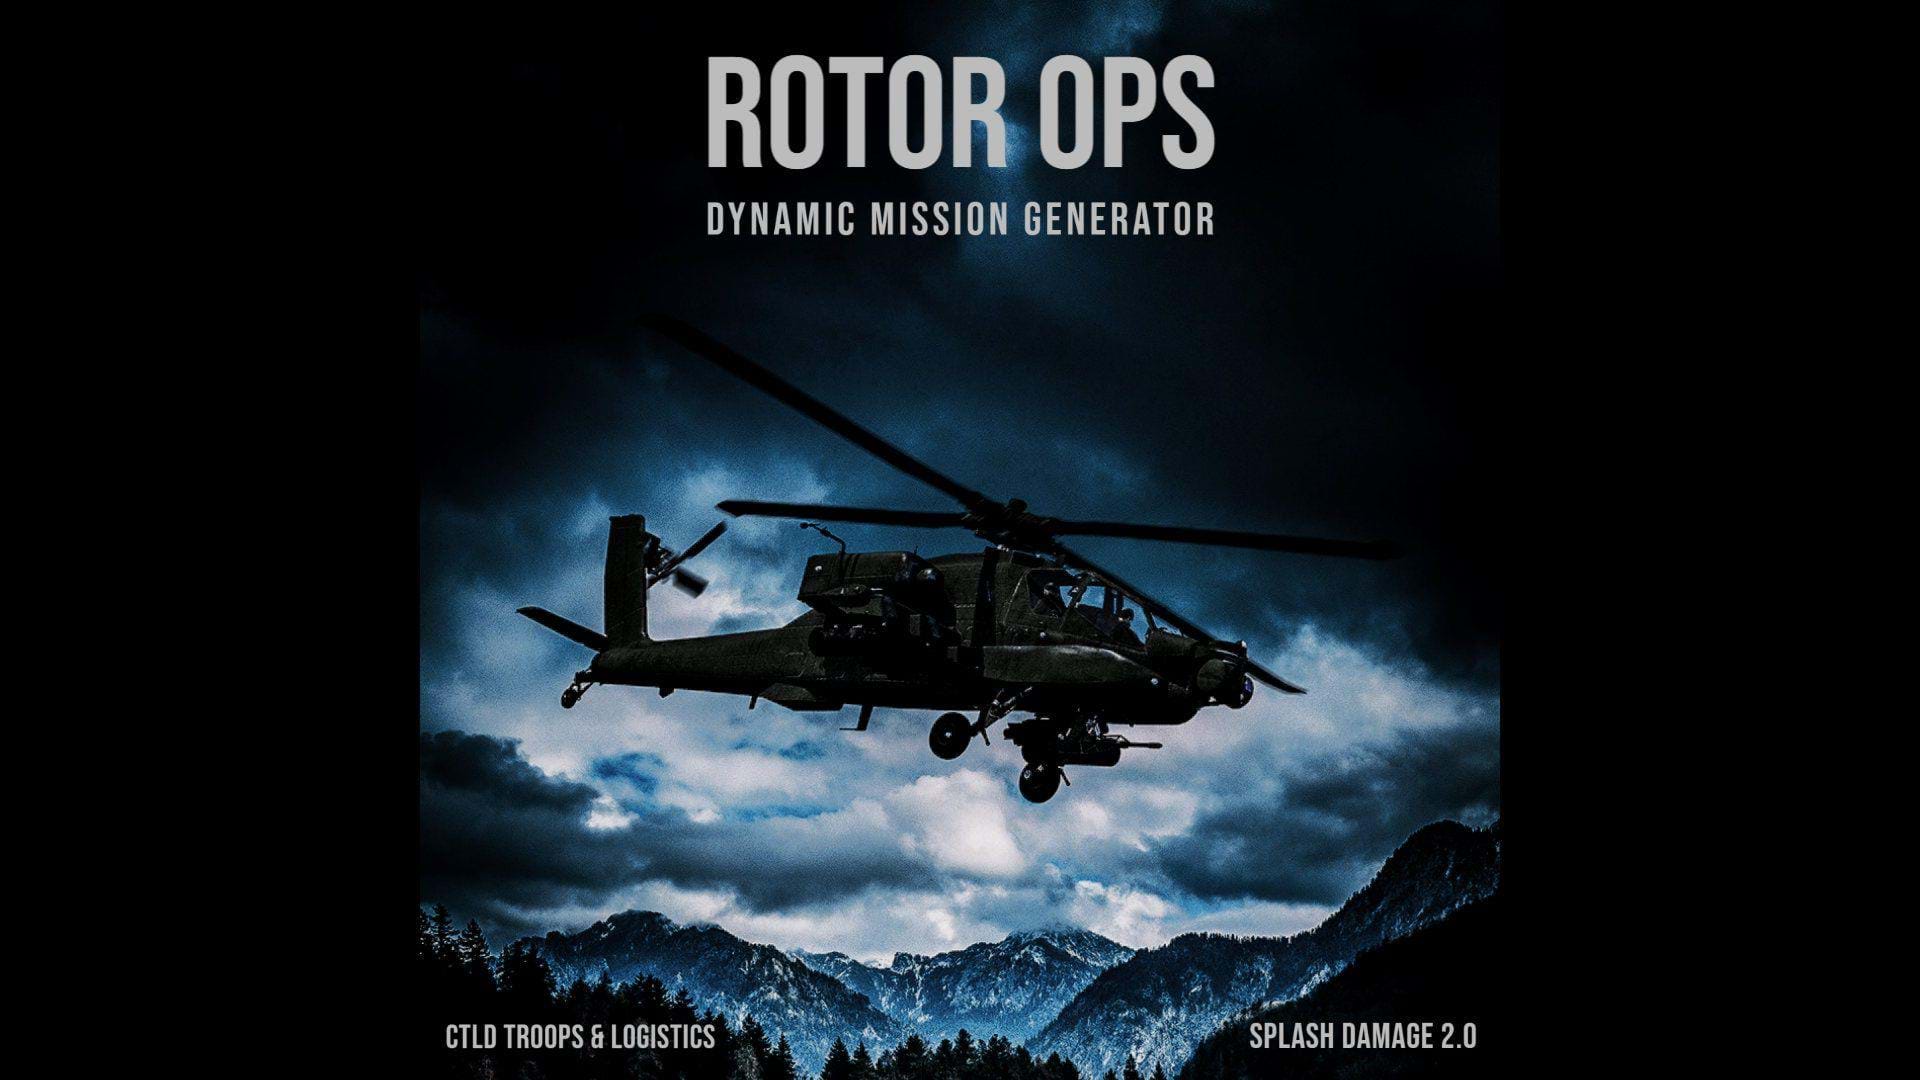 RotorOps for DCS is getting a new update